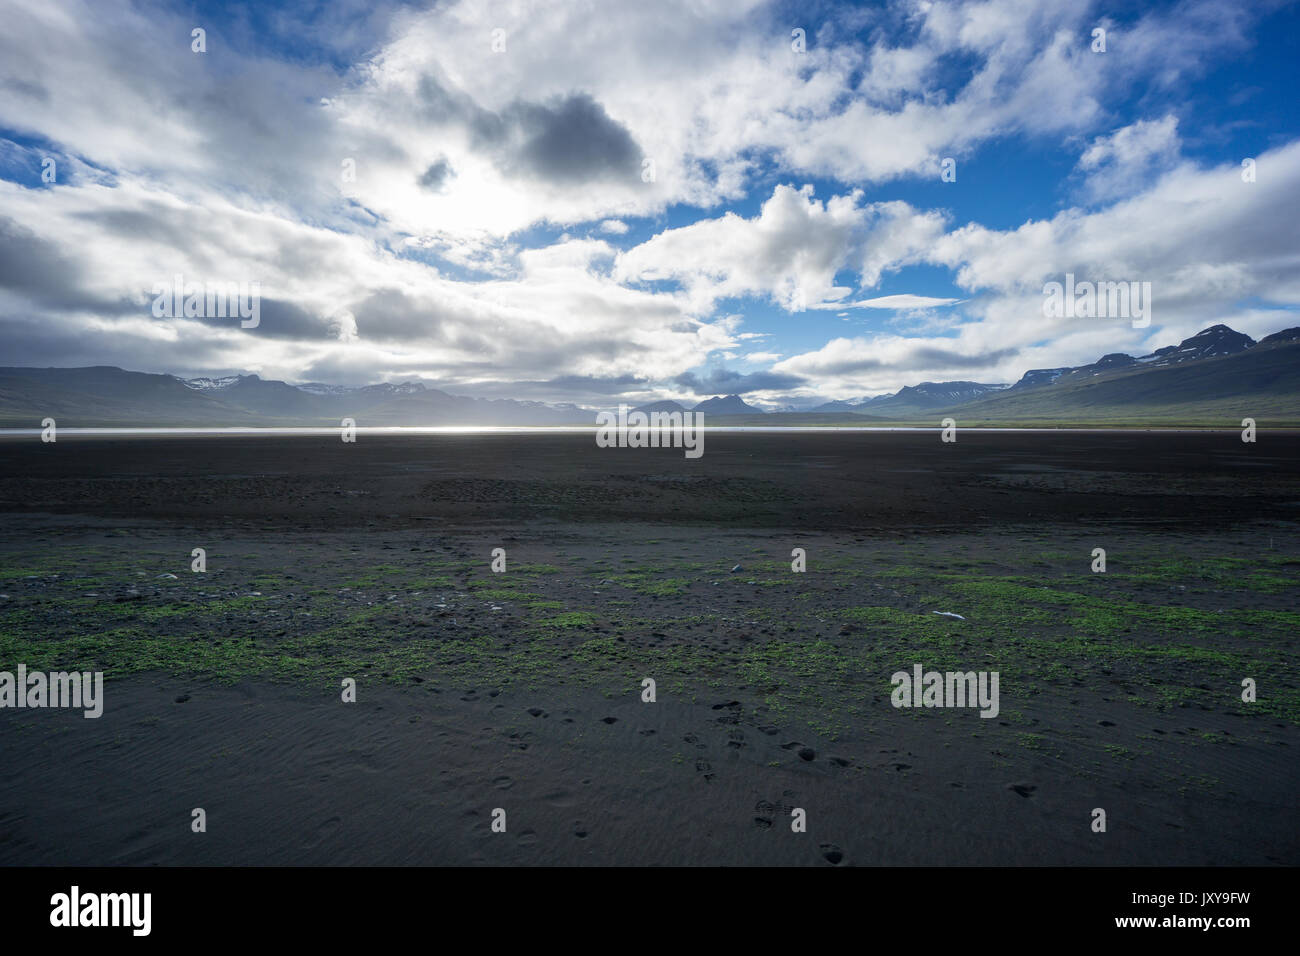 Iceland - Endless flat black sand landscape between snowy mountains Stock Photo